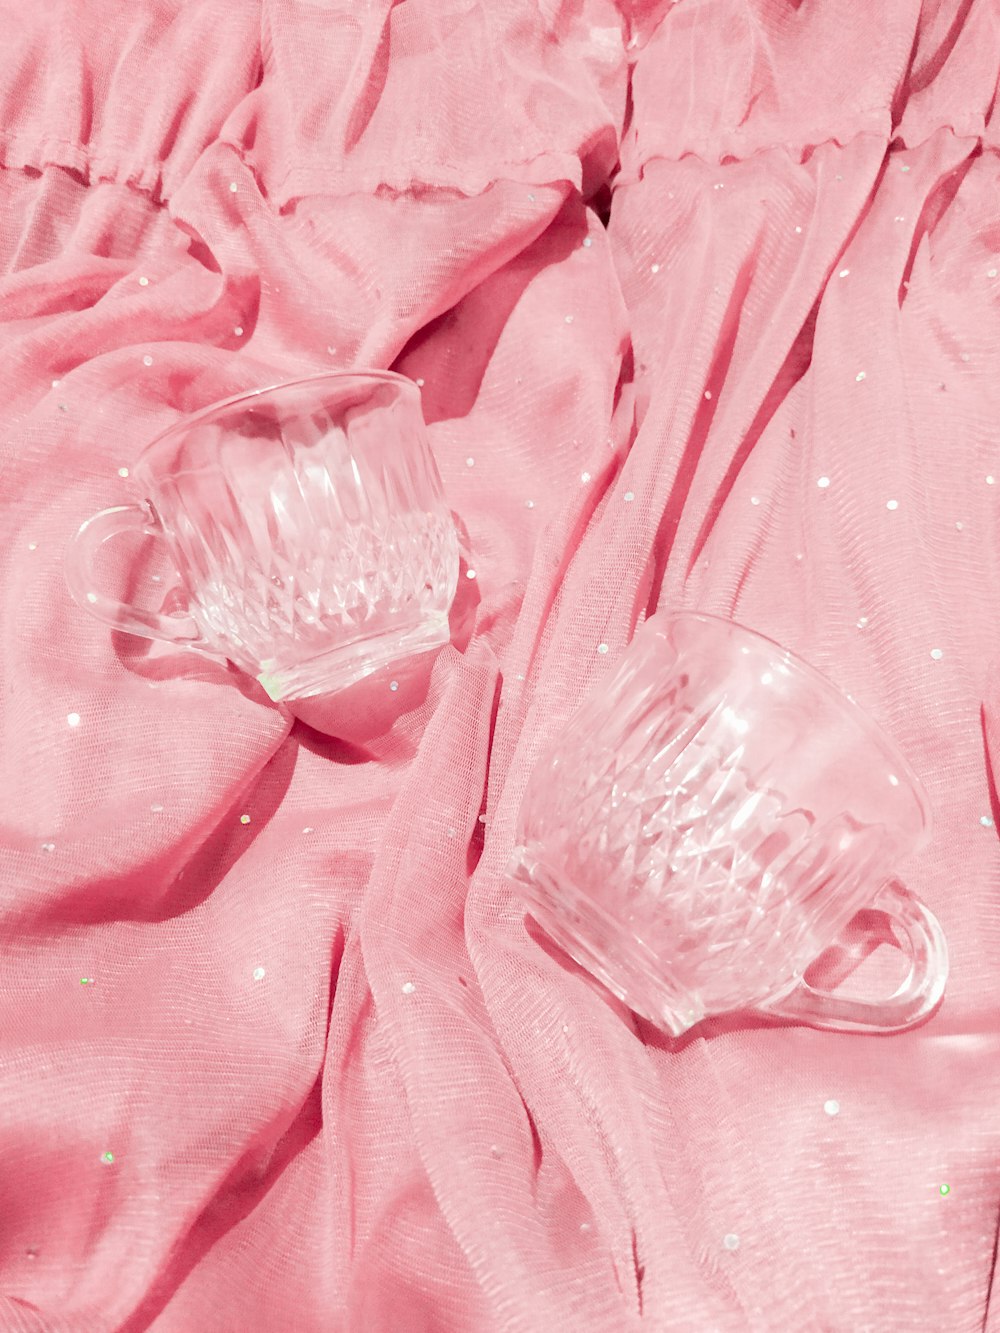 clear glass mug on pink textile